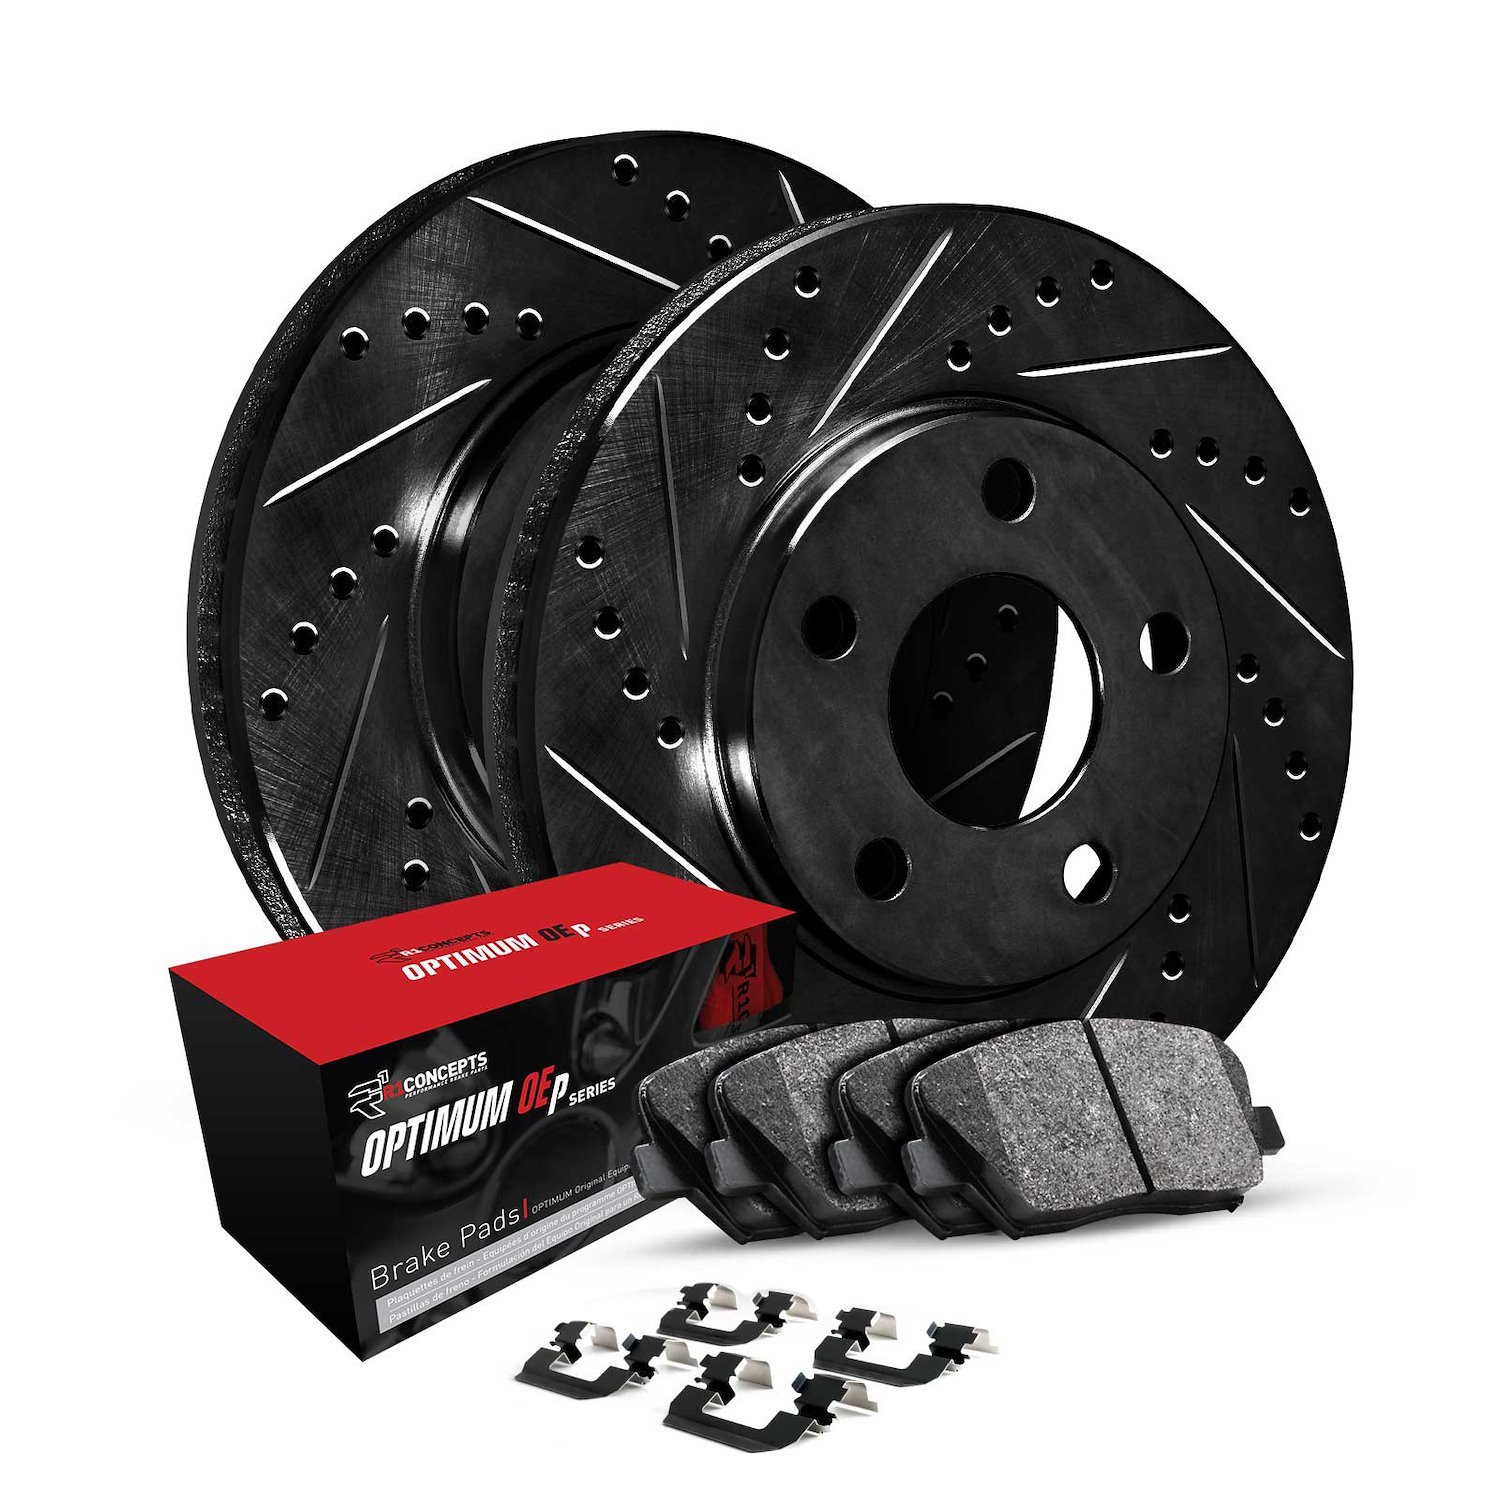 R1 Concepts WHUH1-31138: E-Line Drilled & Slotted Black Brake